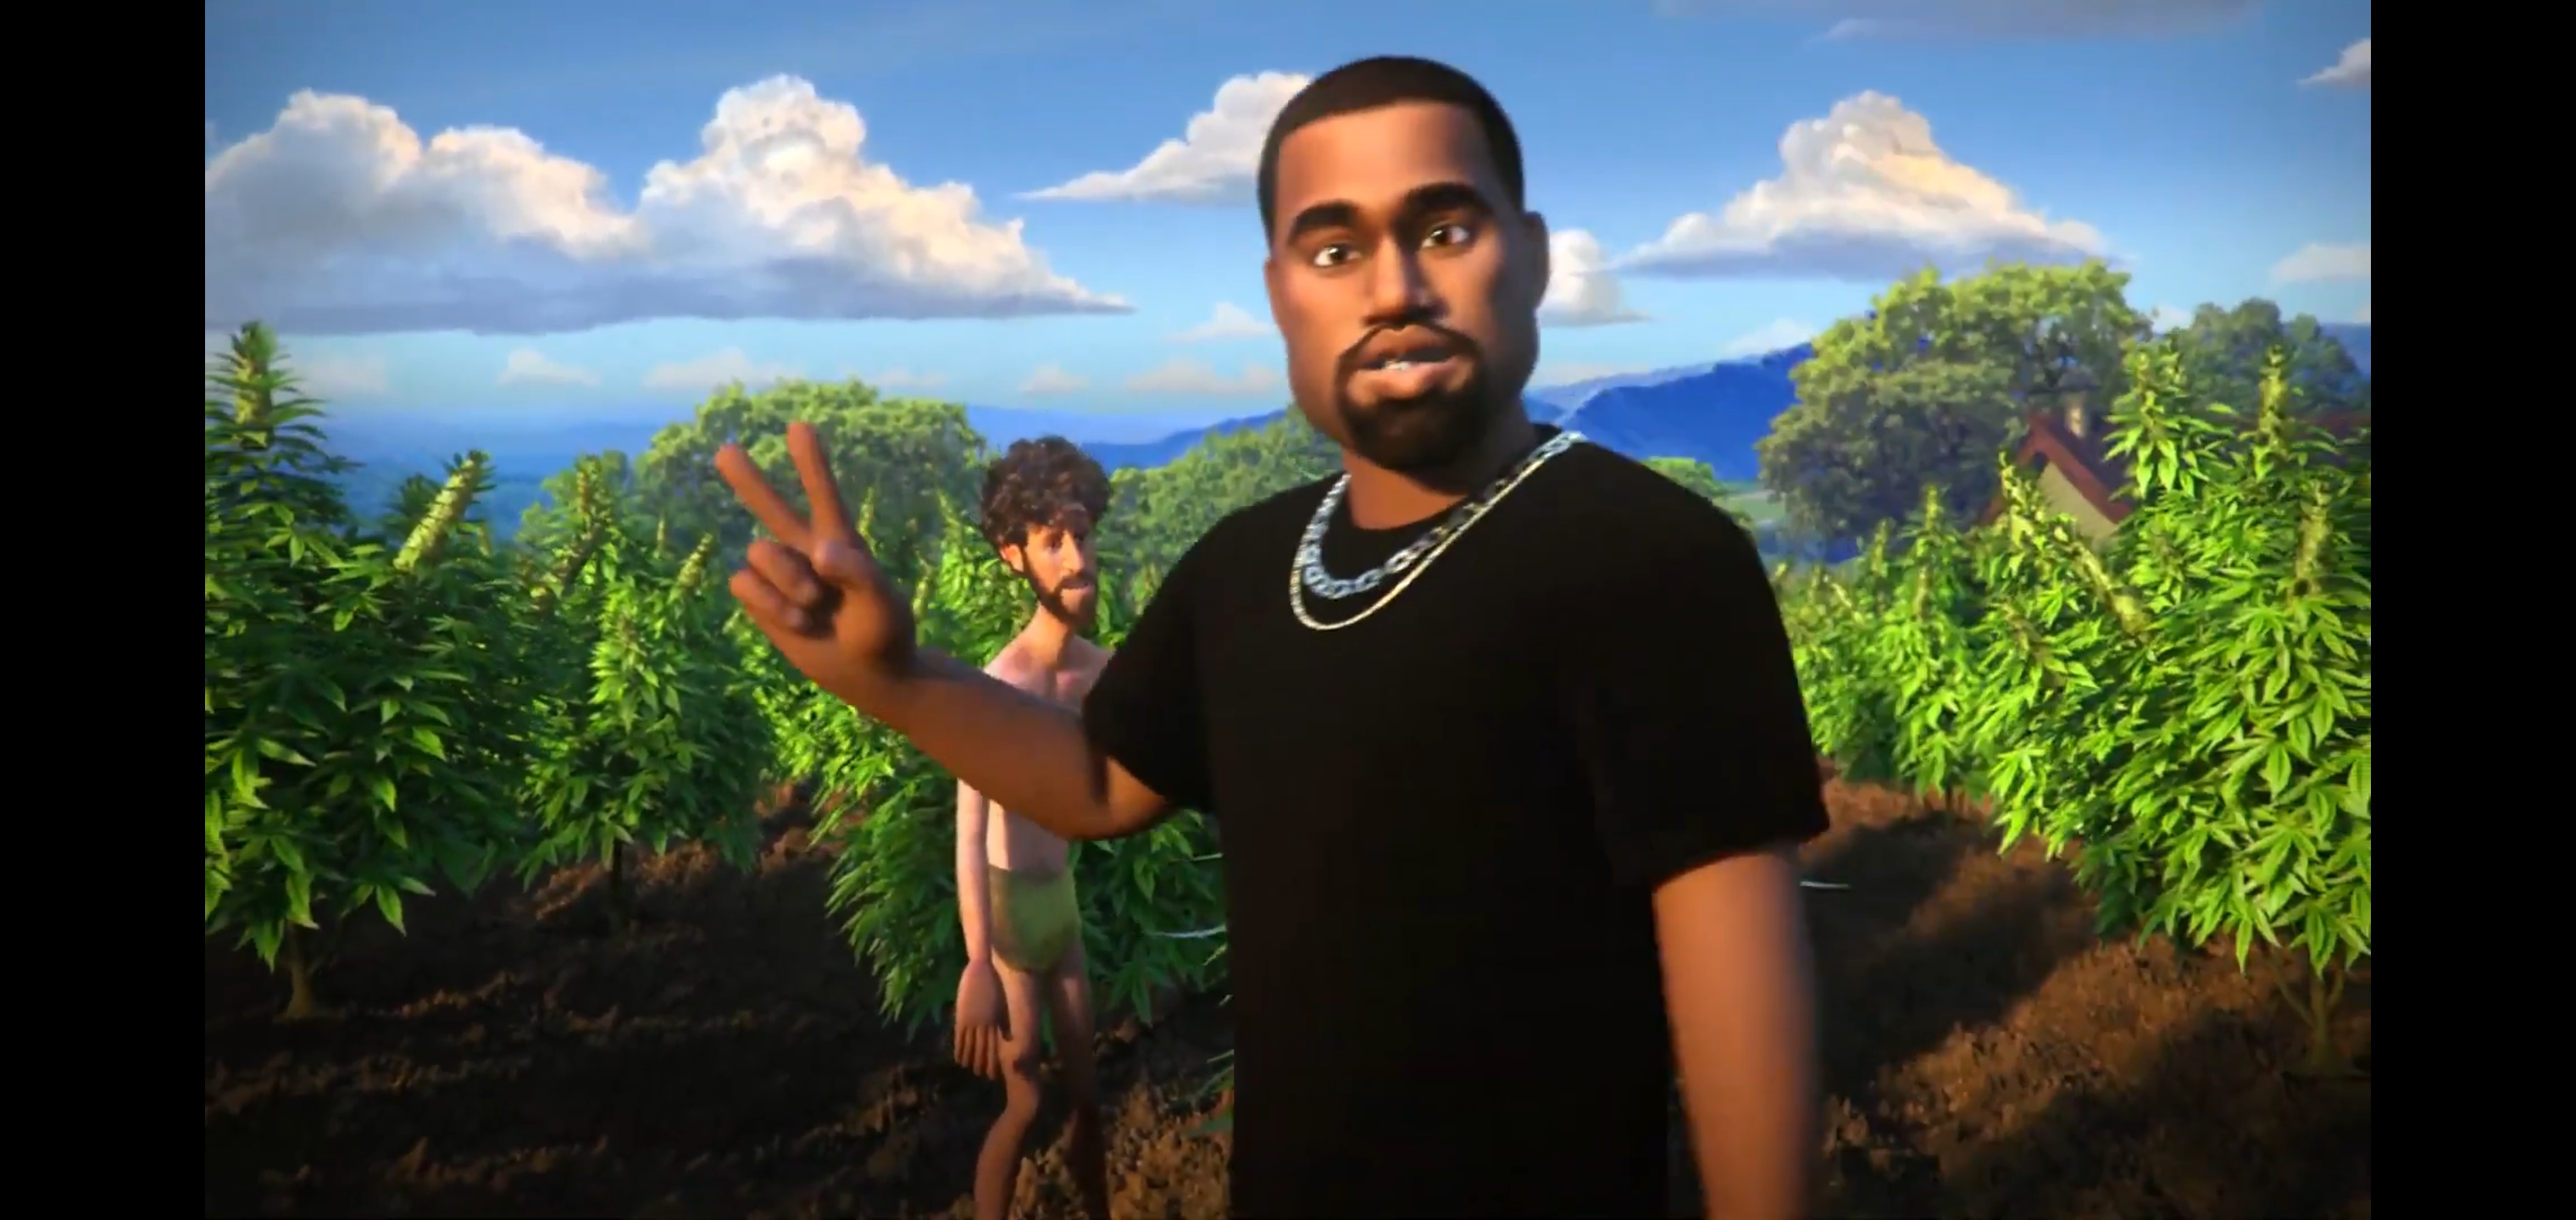 Kanye in Lil Dicky's Earth music video, voiced